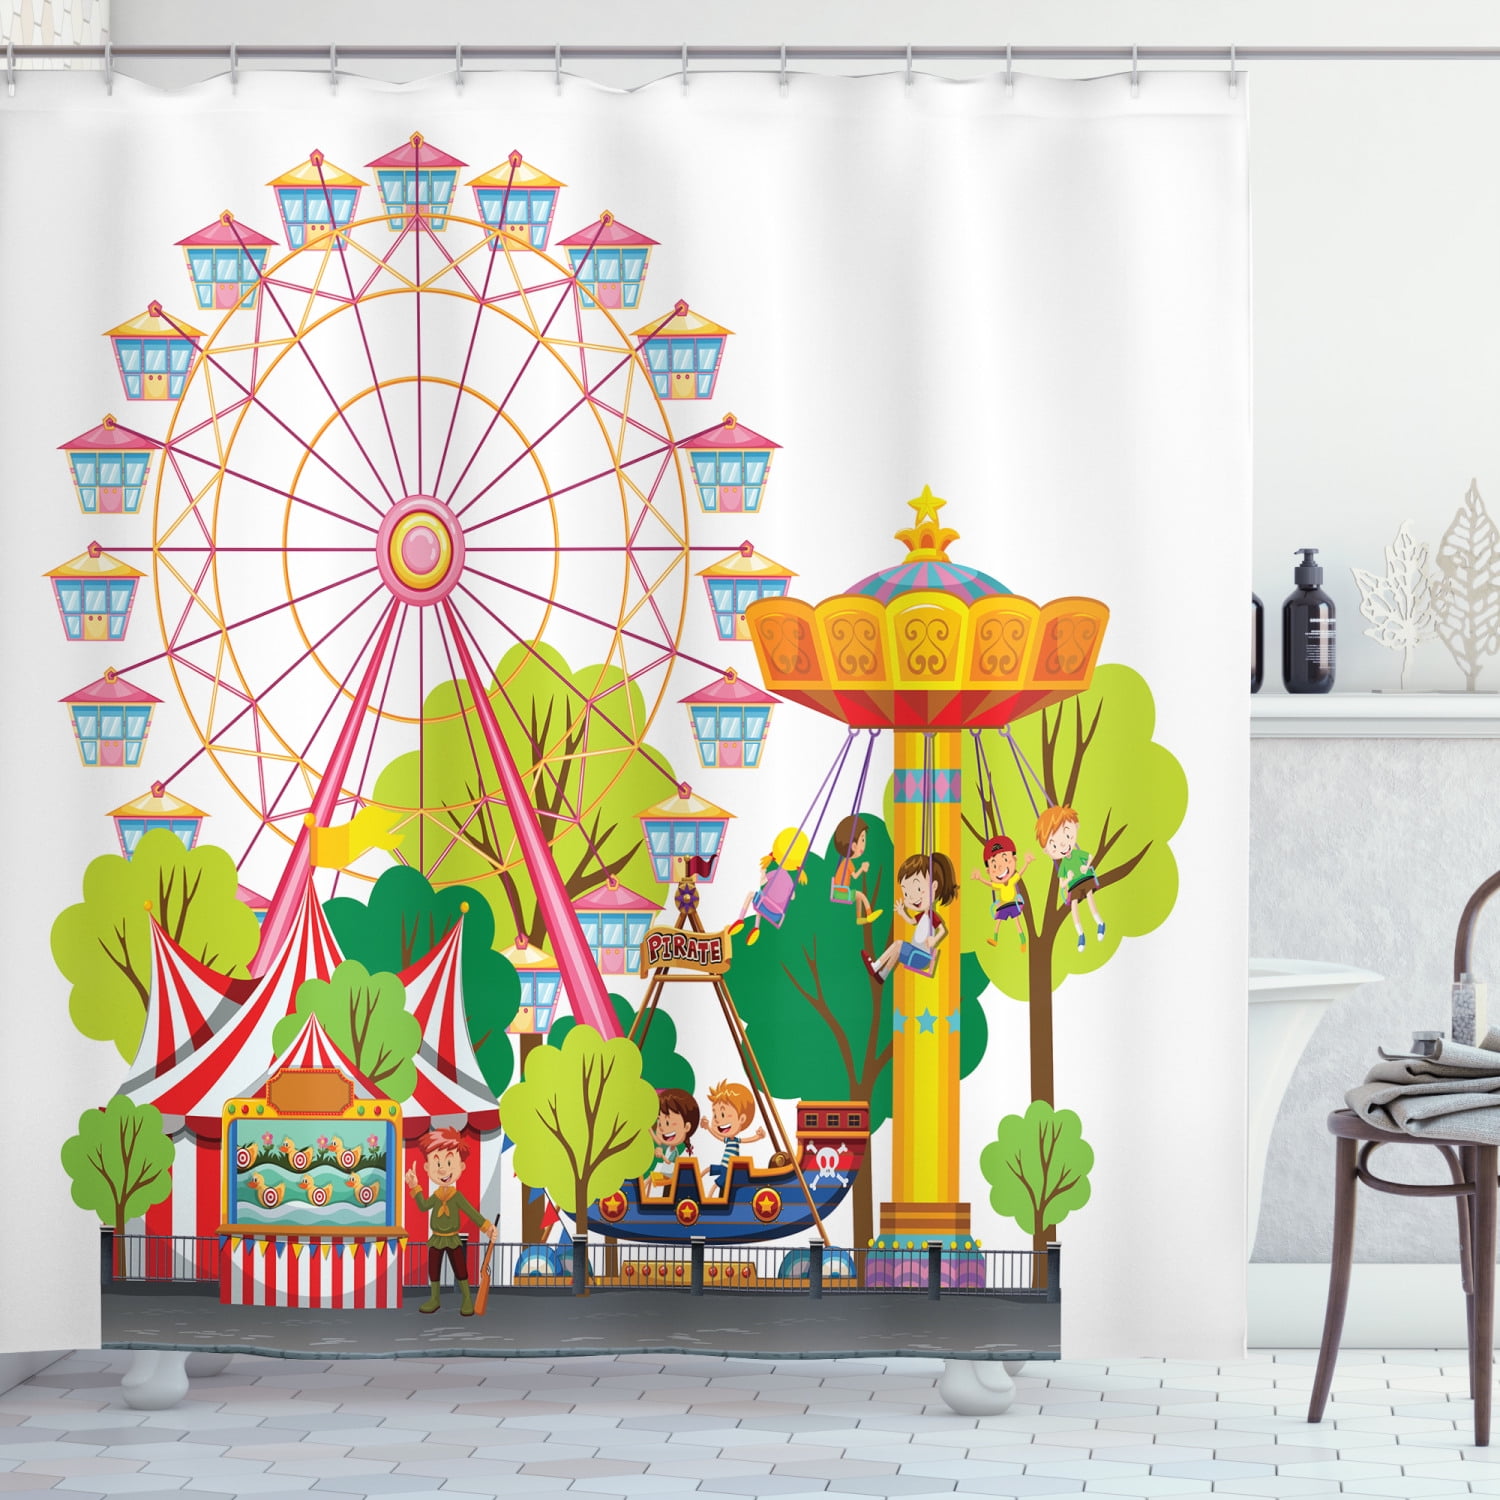 Carnival Circus Tent Shower Curtain Liner Bathroom Mat Polyester Fabric Hooks 